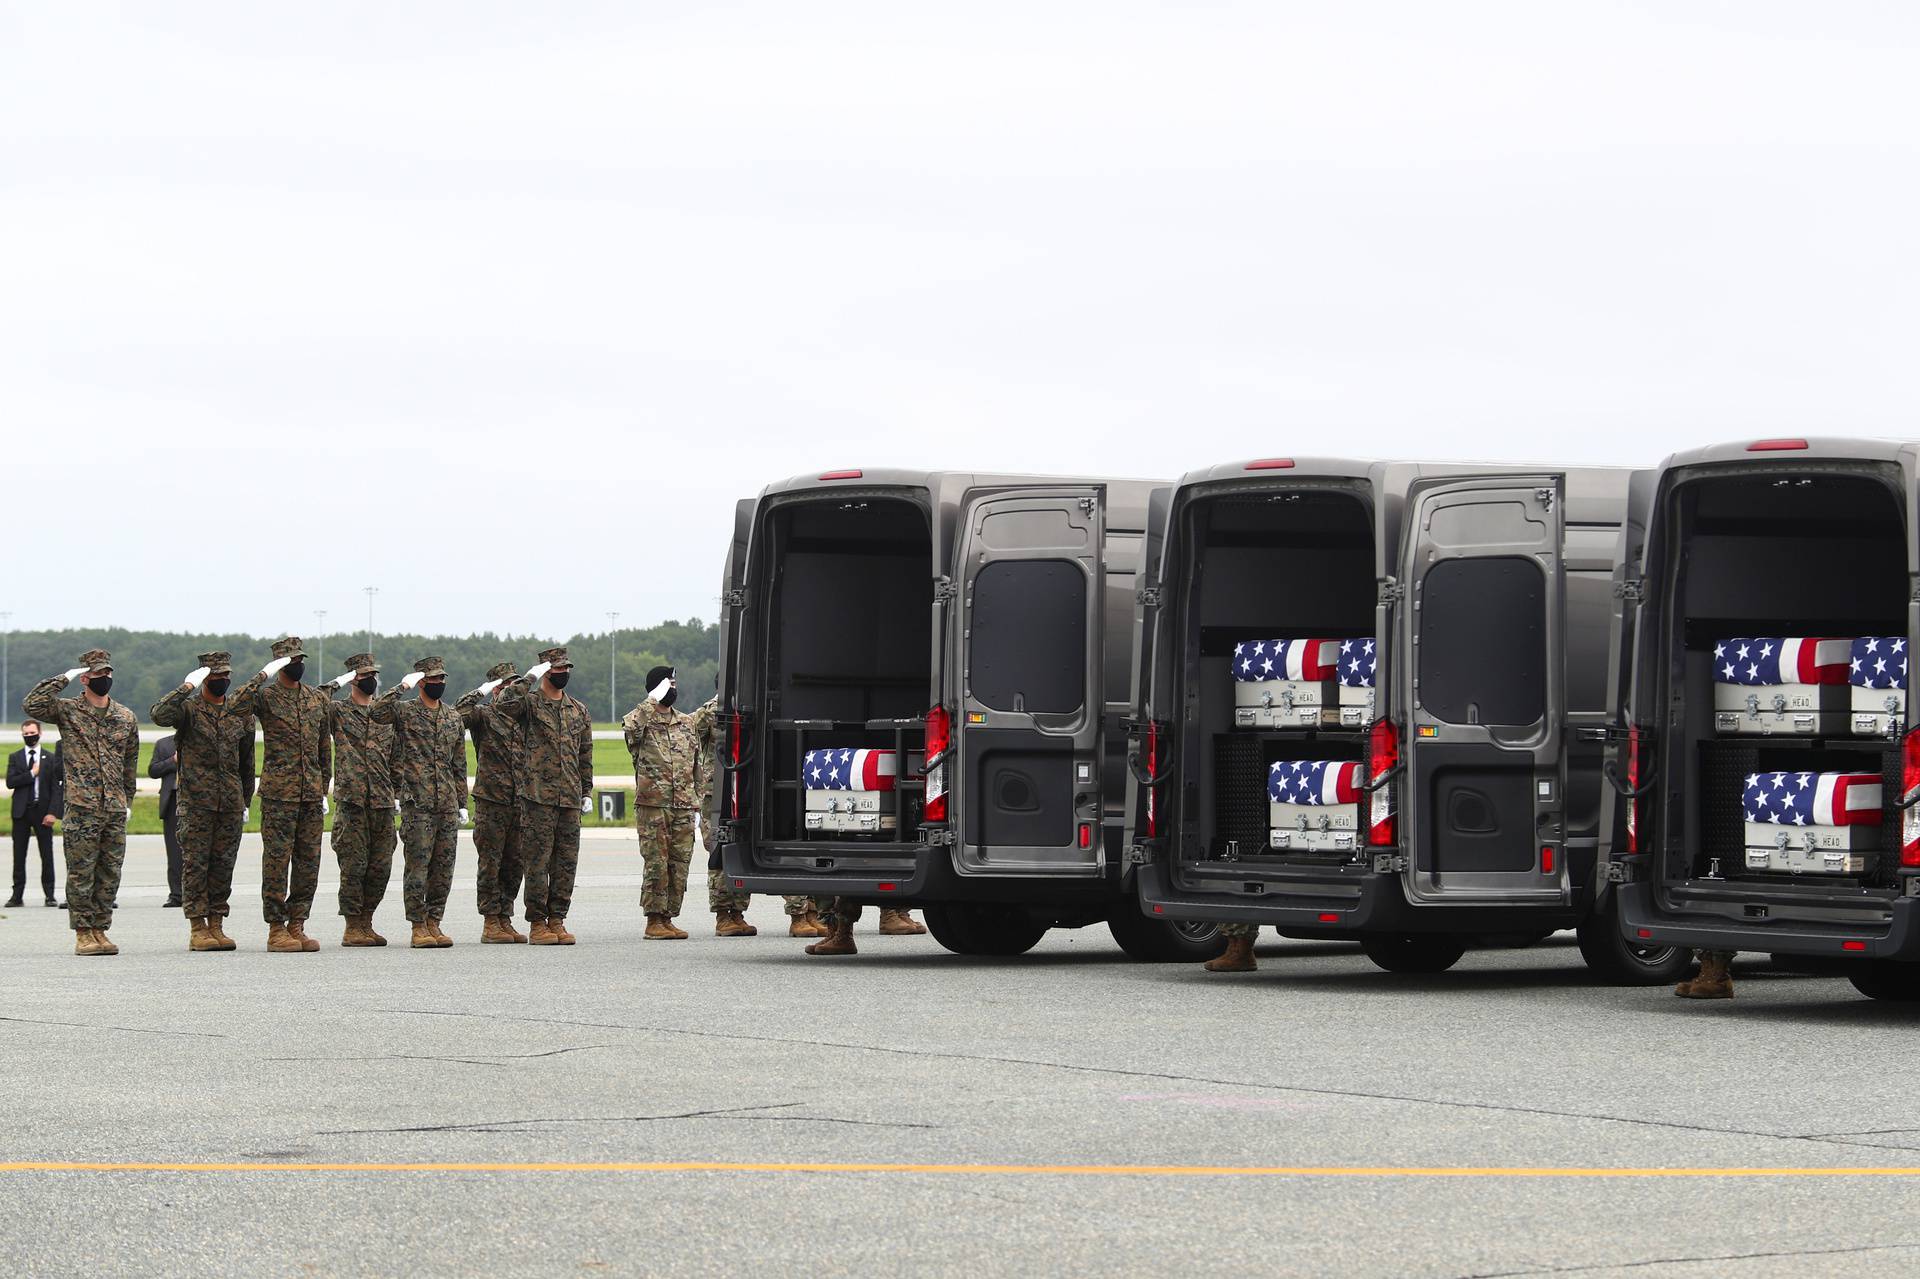 Dignified transfer of the remains of U.S. Military service members who were killed by a suicide bombing at the Hamid Karzai International Airport